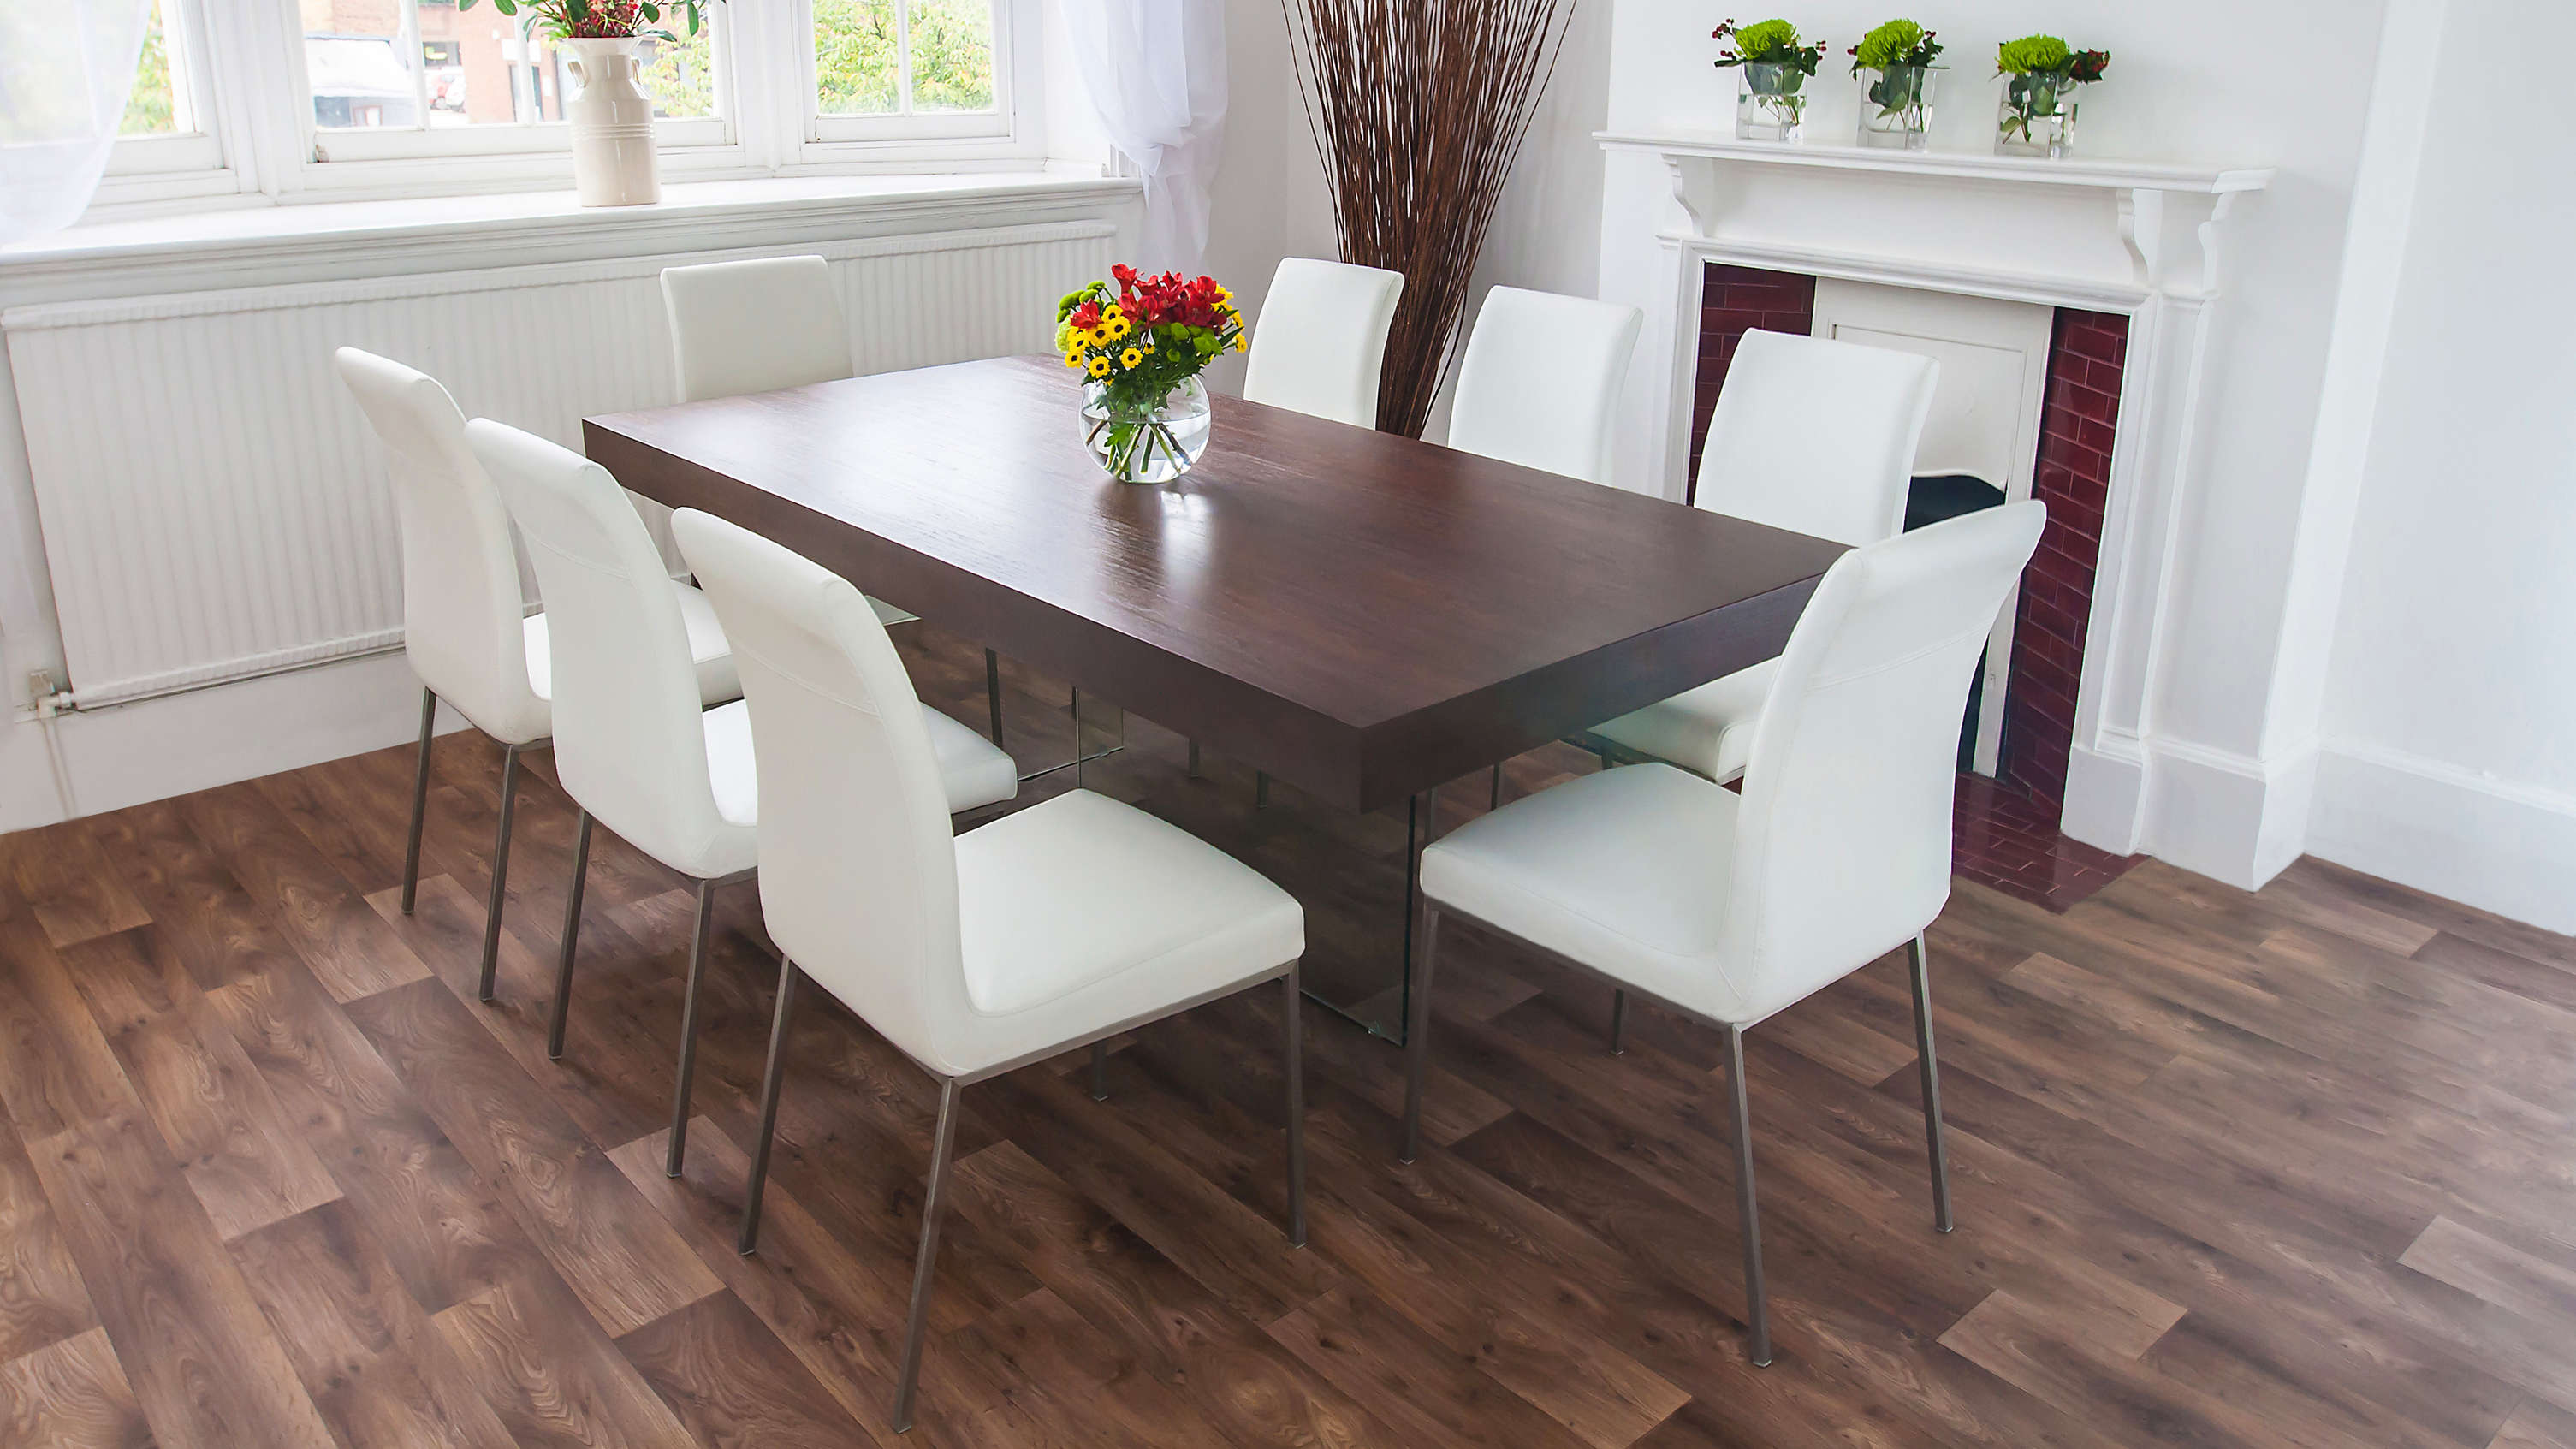 Rectangular Wooden Dining Table and White Dining Chairs